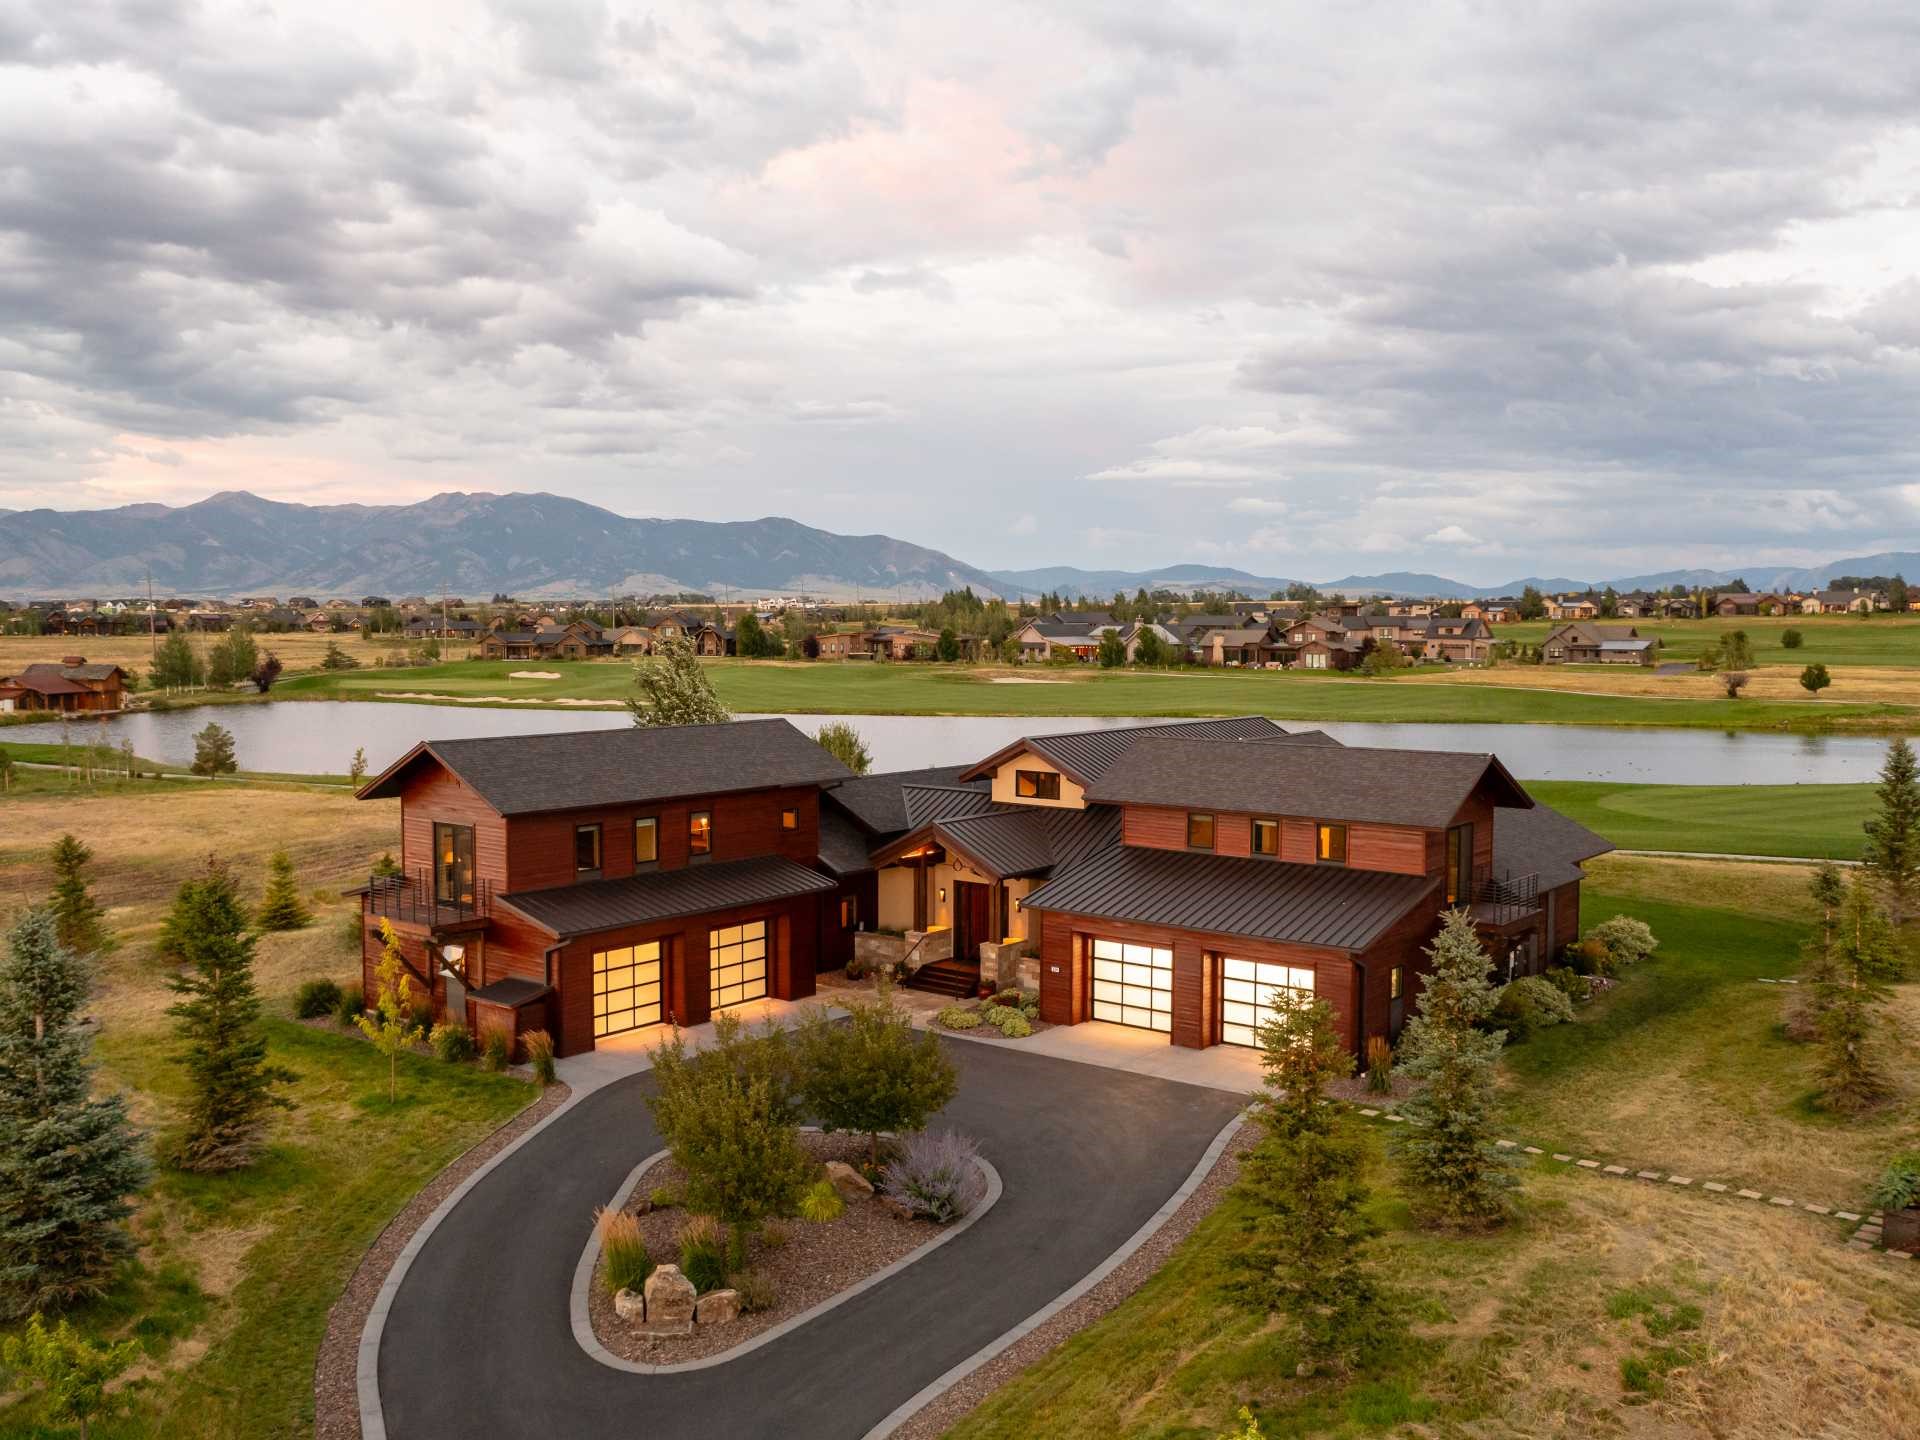 A truly one-of-a-kind custom home in Bozeman's exclusive Black Bull Golf Community, 550 Tillyfour Road stretches across two lots totaling nearly 1.5 acres. The home offers an incredible indoor-outdoor living experience, with massive sliding doors opening to a covered patio that gives way to the private community pond and the Bridgers in the distance. The level of detail continues into the kitchen, vaulted living area and exterior, with custom raised beds and a rich mahogany siding that offers a depth & character rarely seen. The home, designed by Bayliss Ward and built in 2016, finds most of its 4,529 SF primarily on the main level, with a truly massive master bedroom and bathroom situated in the rear of the home, a 1800+ bottle climate controlled wine room inside the separate pantry and a sleek, grand kitchen that's perfect for entertaining. Above each of the two 2 car garages are en-suite bedrooms, each with private balconies and views in different directions.